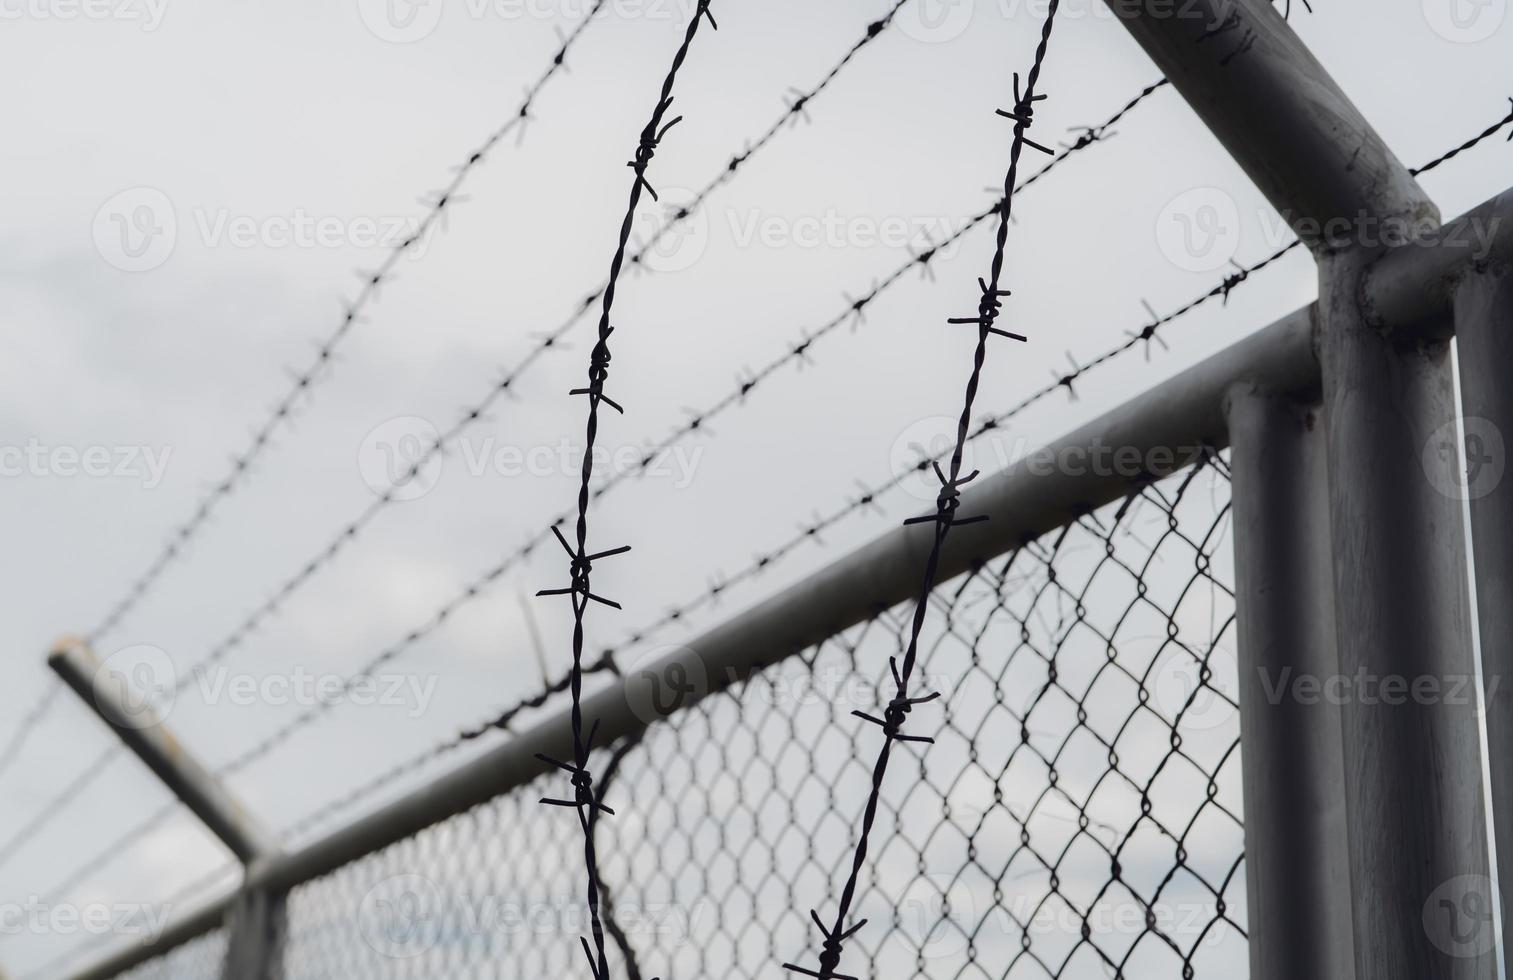 Prison security fence. Border fence. Barbed wire security fence. Razor wire jail fence. Boundary security wall. Prison for arrest of criminals or terrorists. Private area. Military zone concept. photo